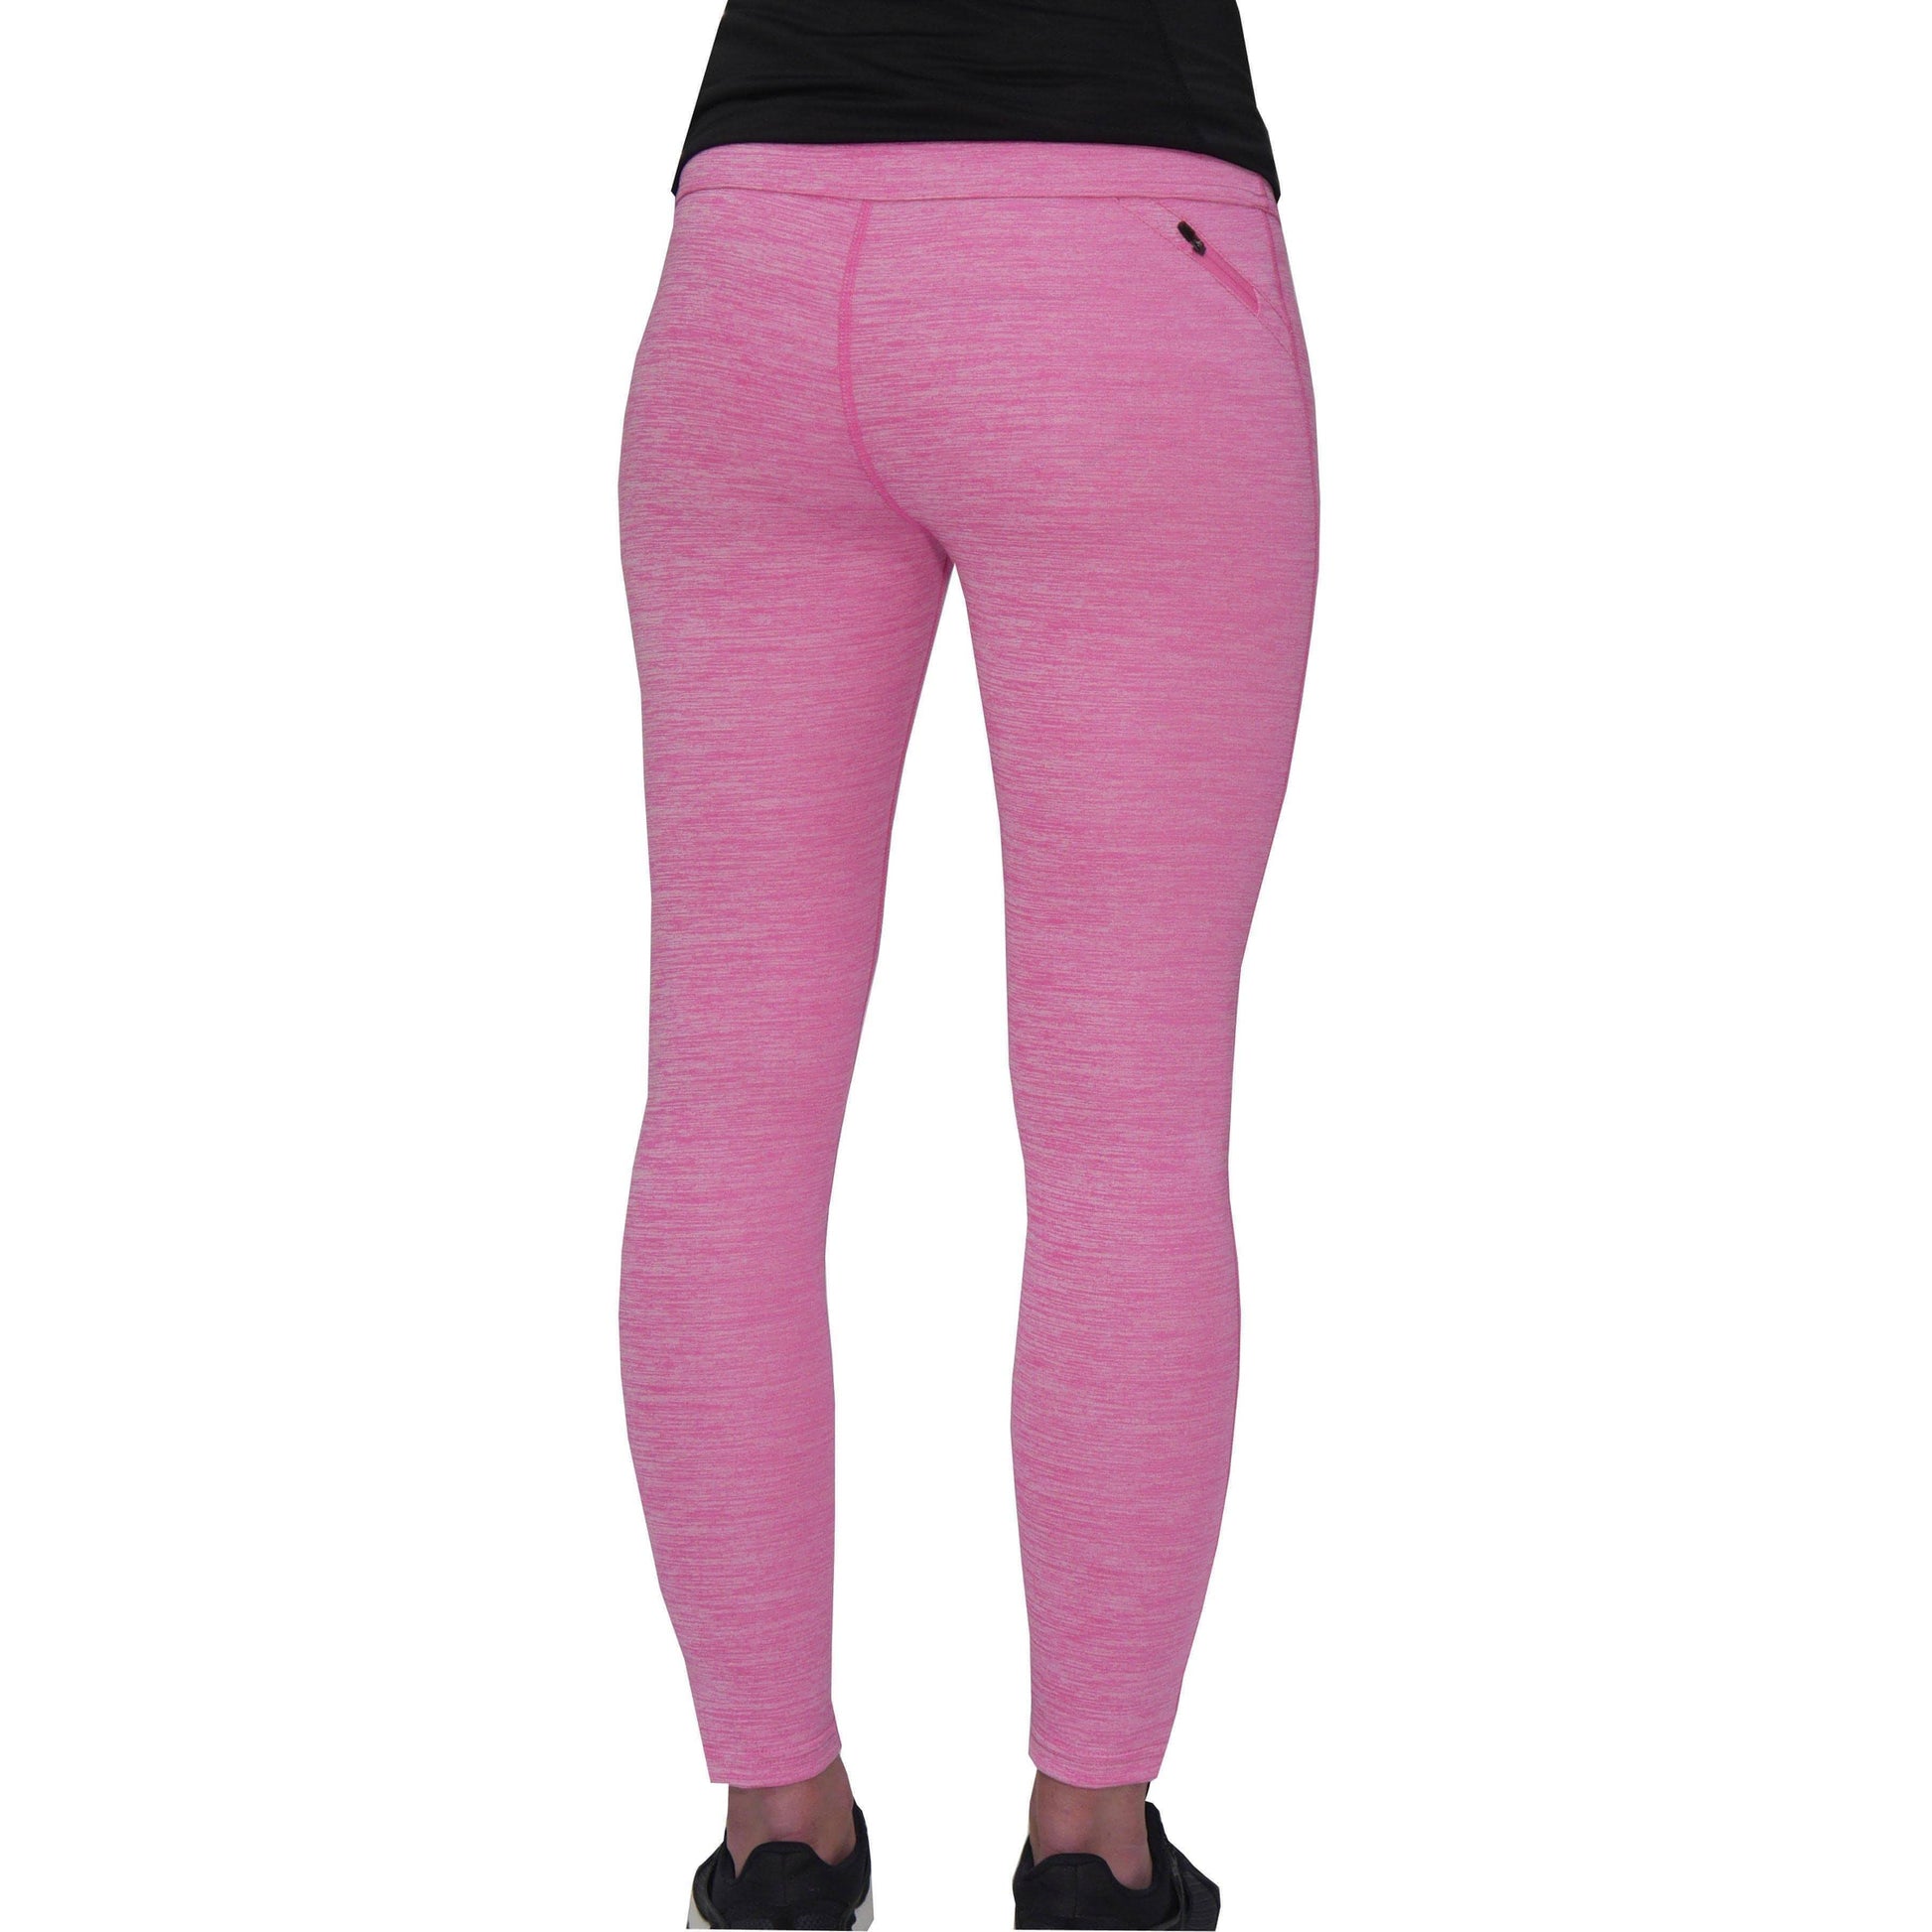 More Mile Heather Girls Long Running Tights - Pink - Start Fitness